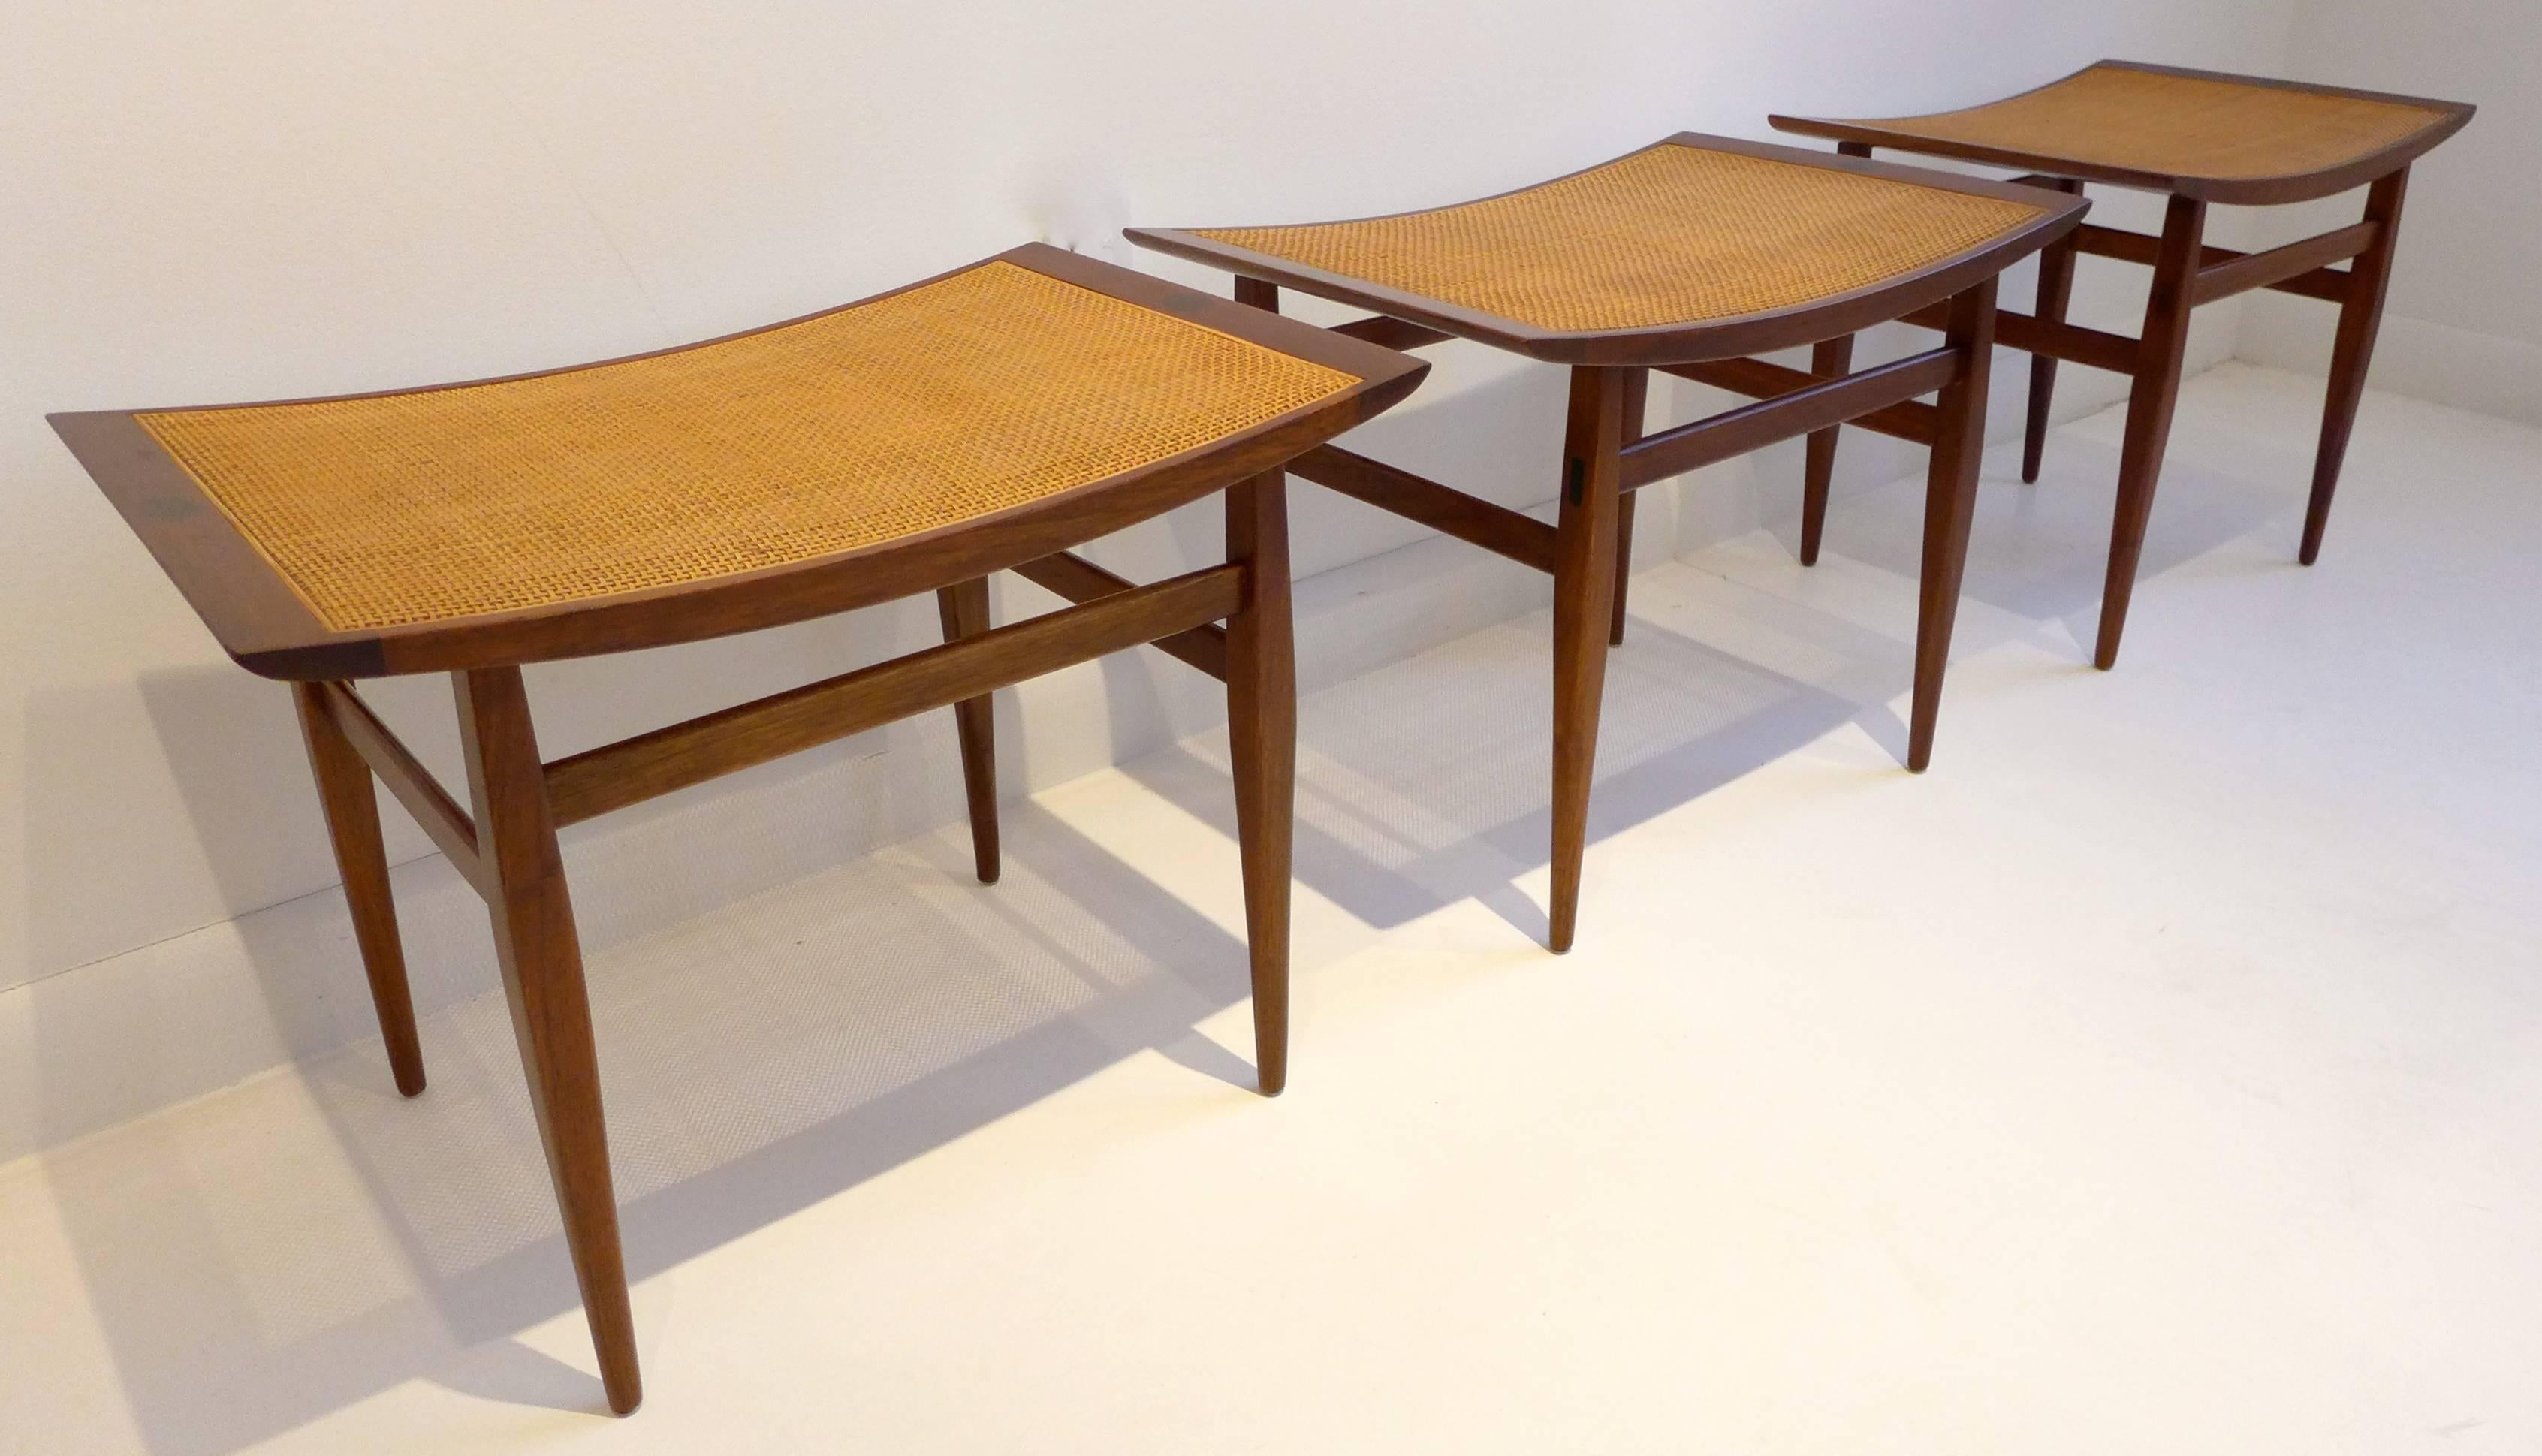 Three stools or benches designed by Kipp Stewart and made by Calvin Furniture for Directional, circa 1950s. A graceful and beautifully detailed work, with carved walnut legs, curved seats, ebony details and original caning. Priced individually.